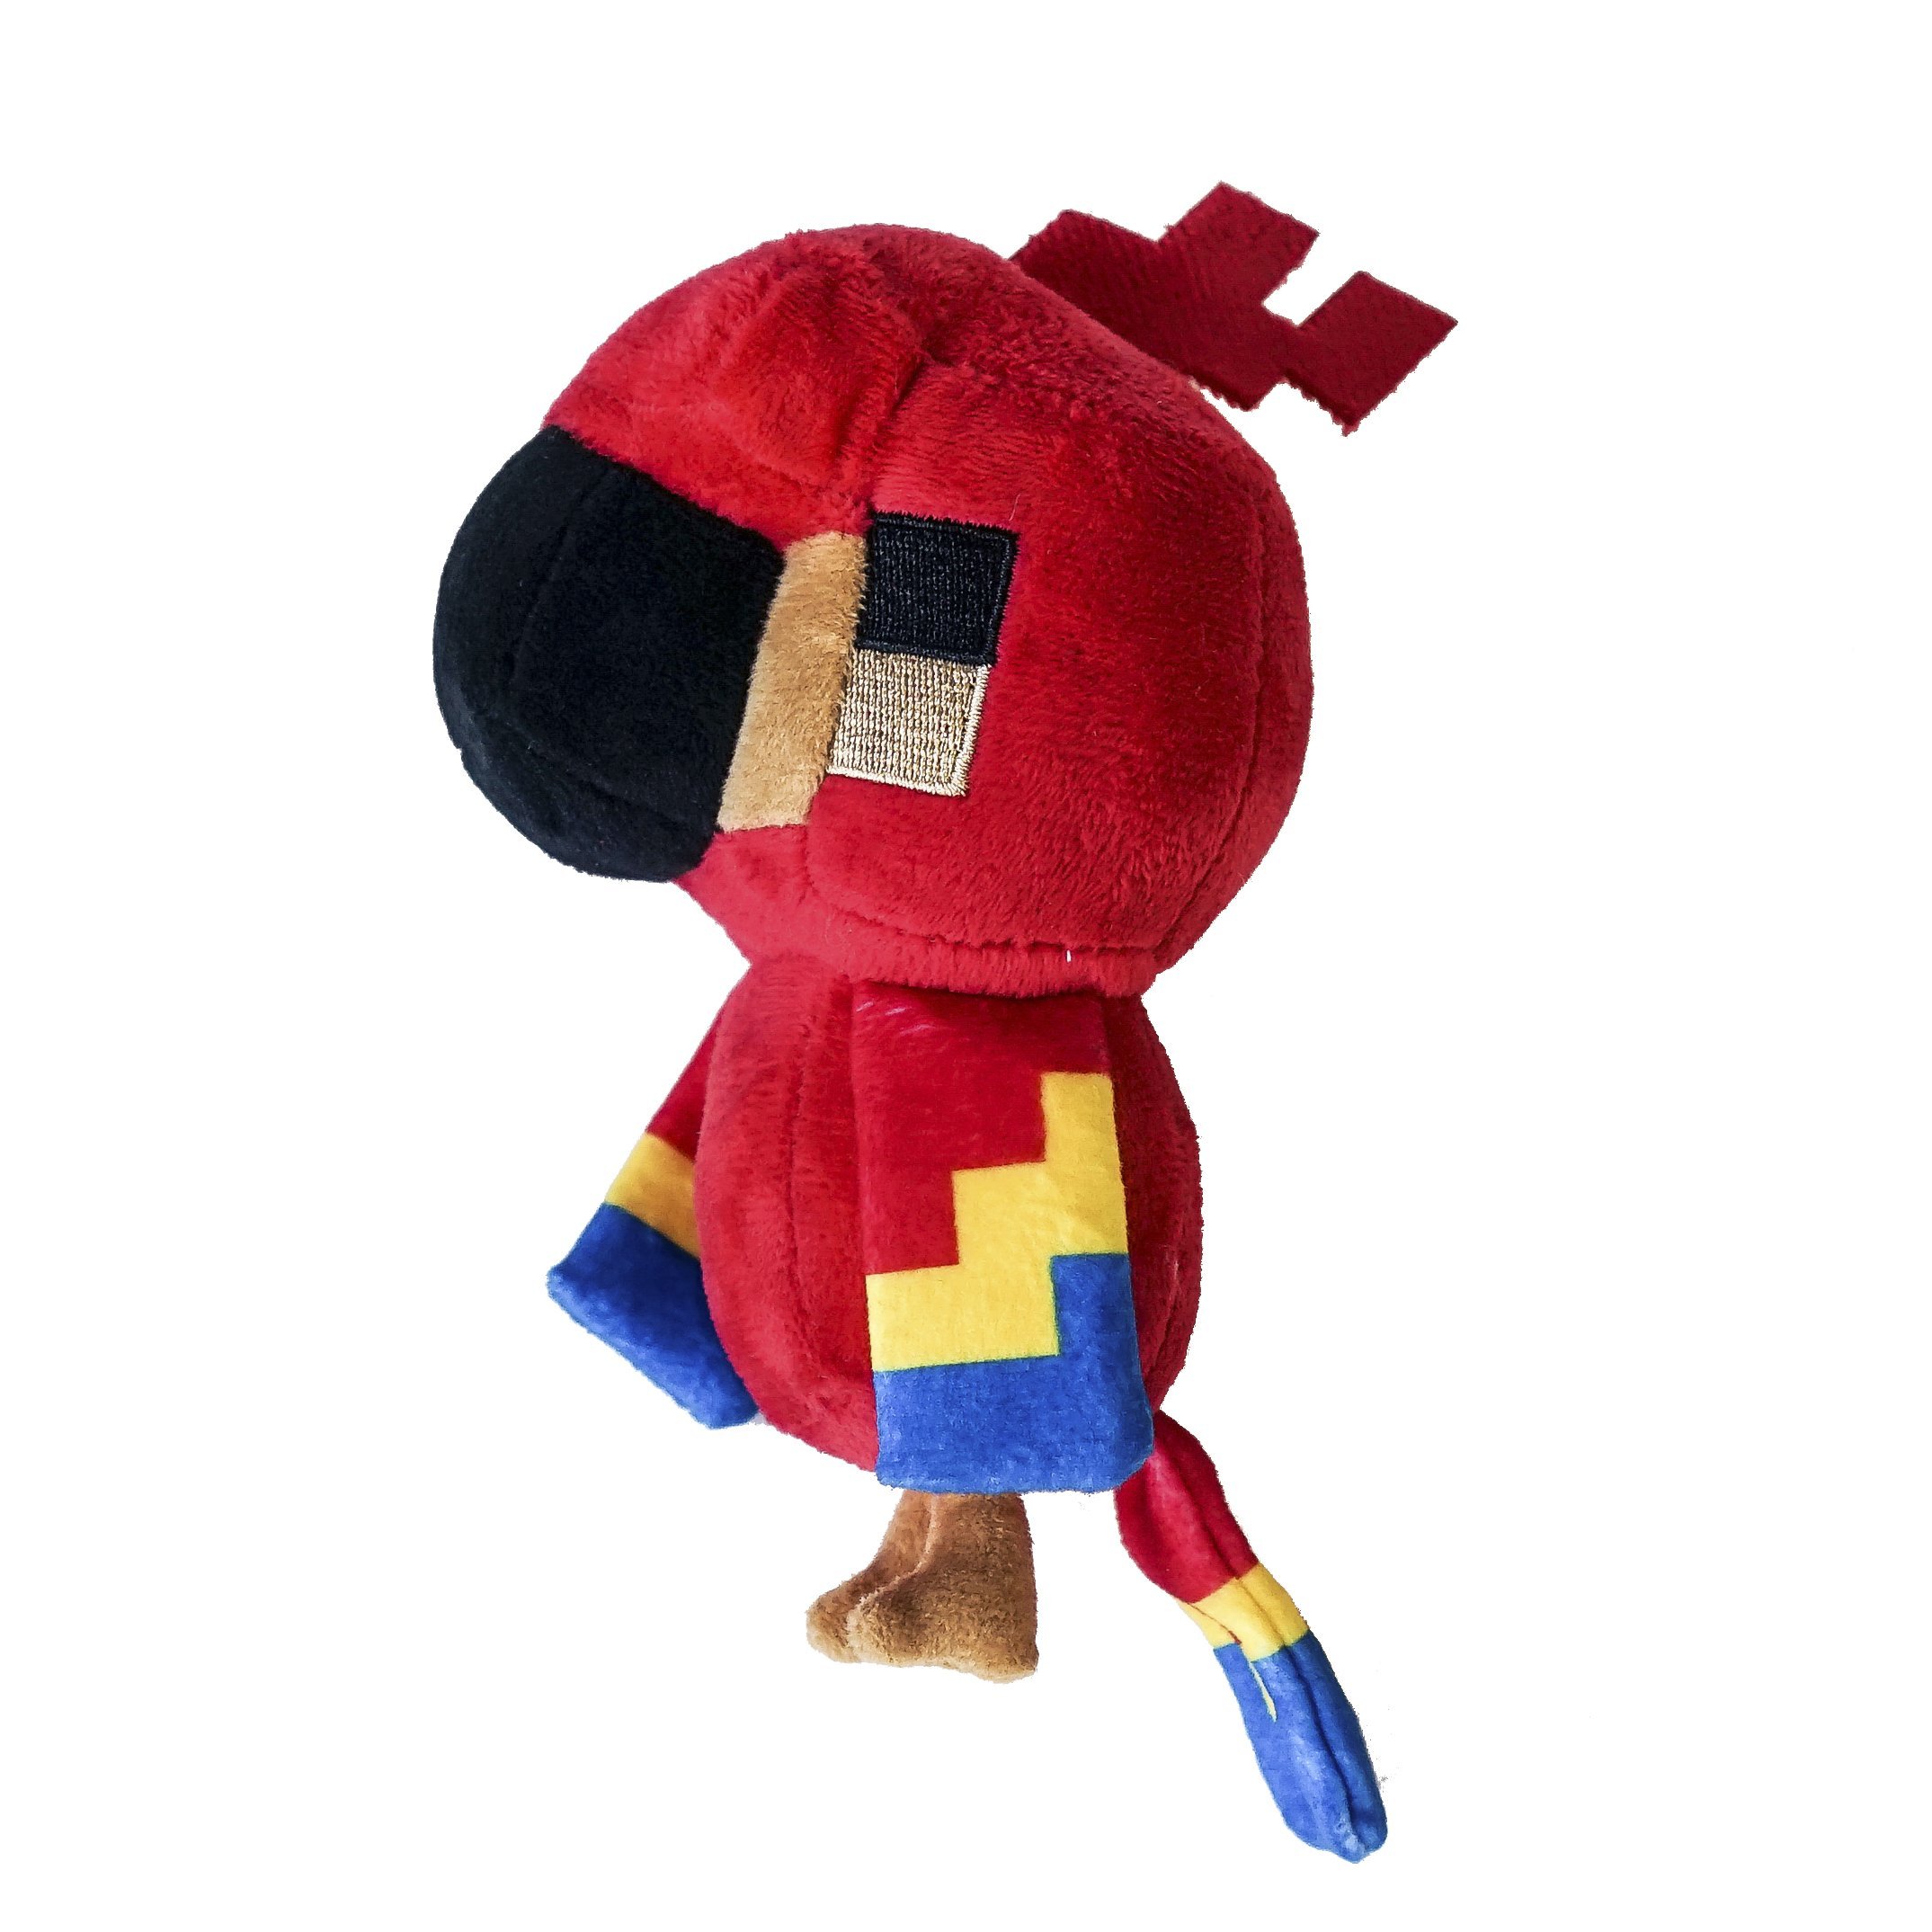 Minecraft Parrot Plush Toy Stuffed Animal Doll For Kids Holiday Gifts Home Decoration